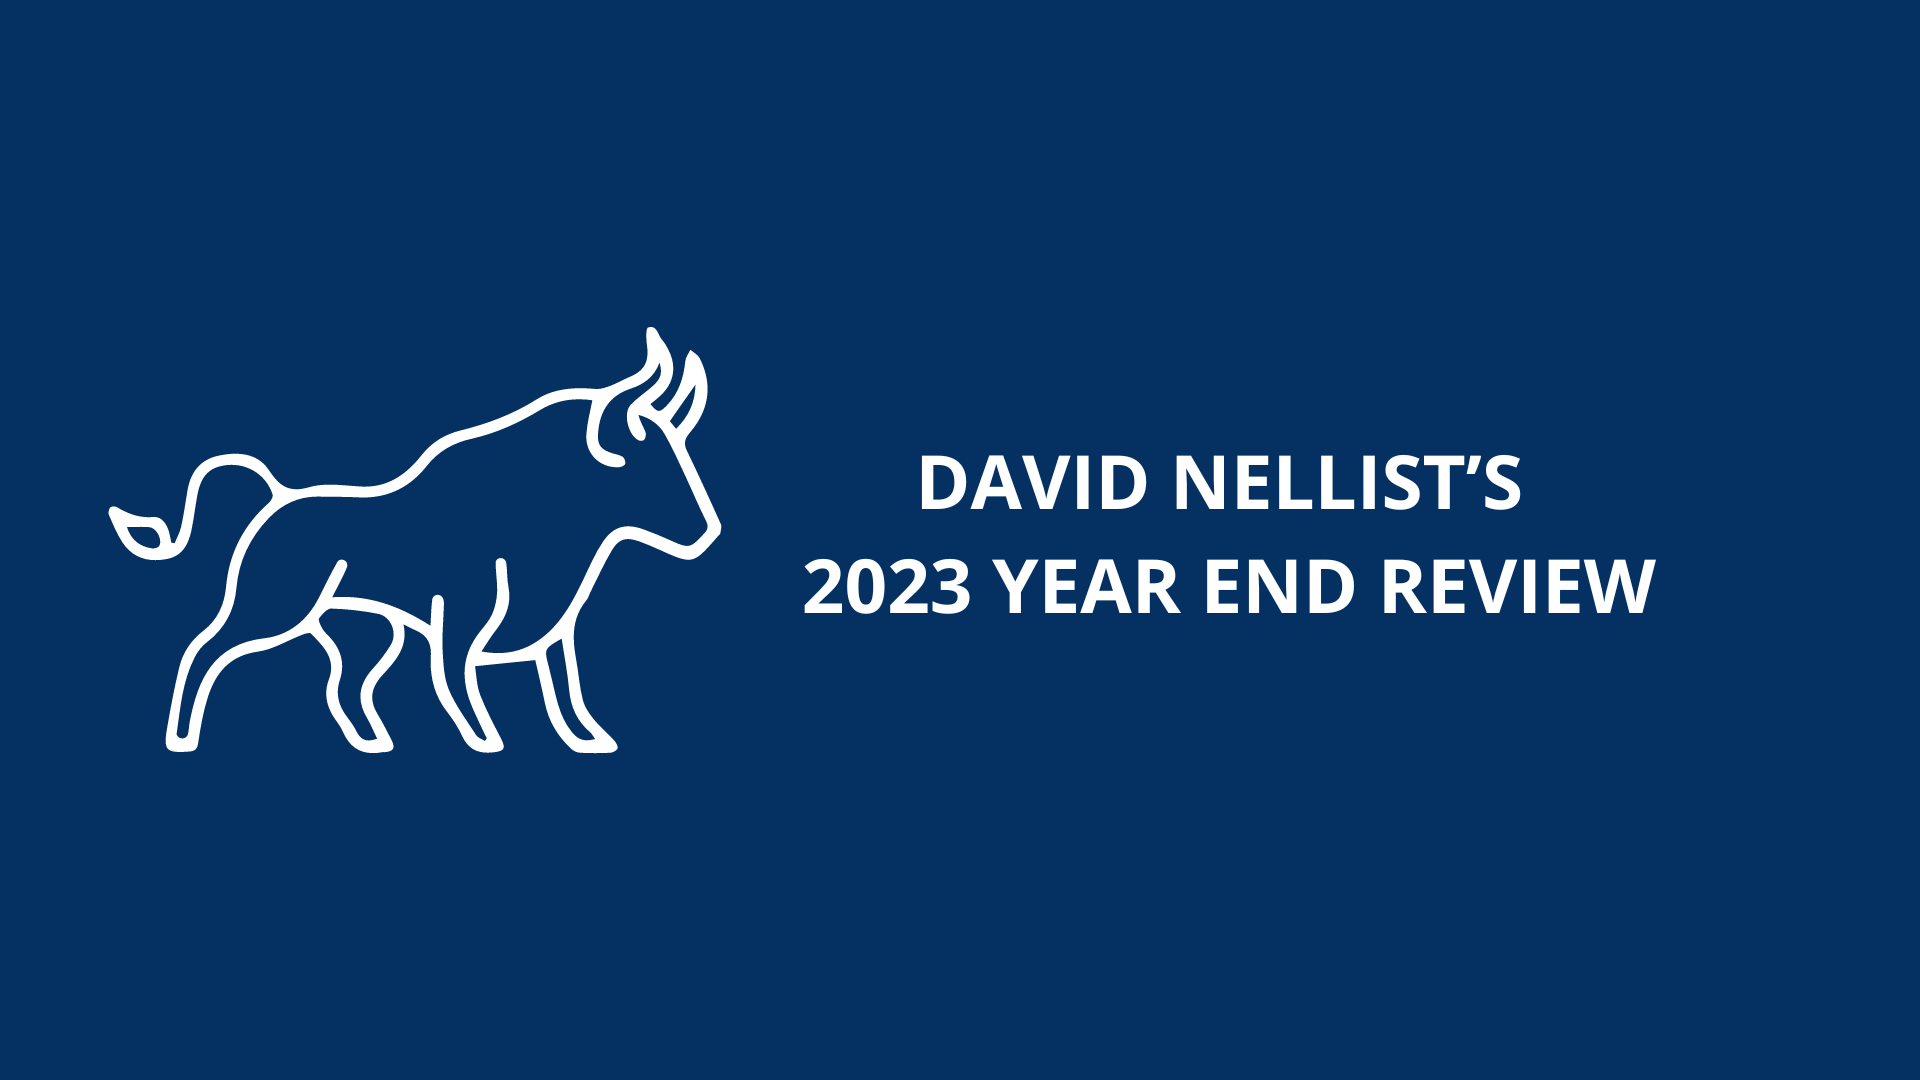 David’s 2023 Year End Review (Video)